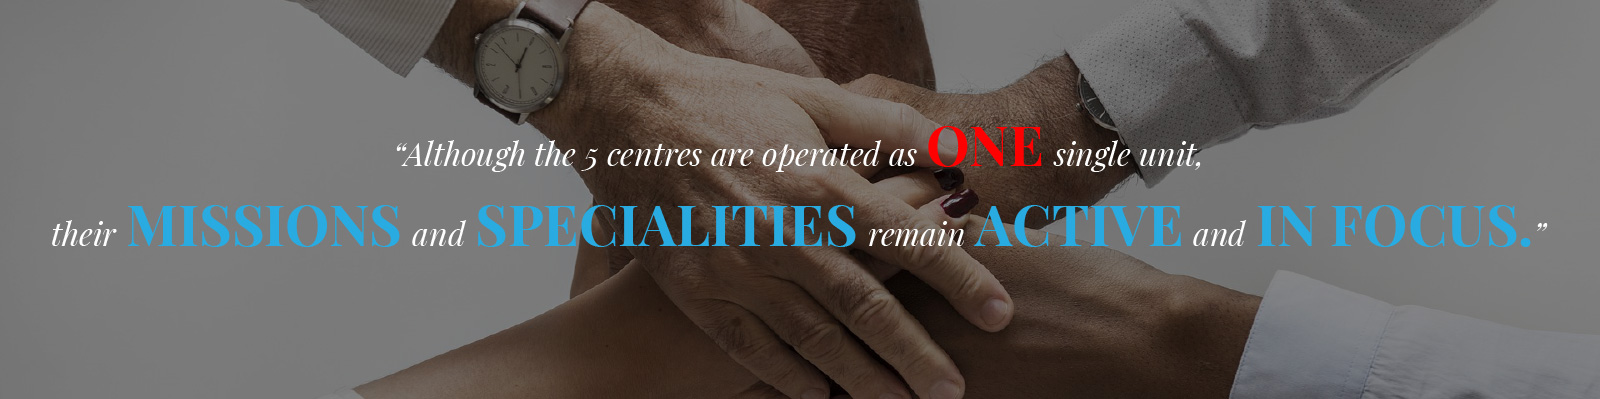 Although the 5 centres are operated as ONE single unit, their MISSIONS and SPECIALITIES remain ACTIVE and IN FOCUS.